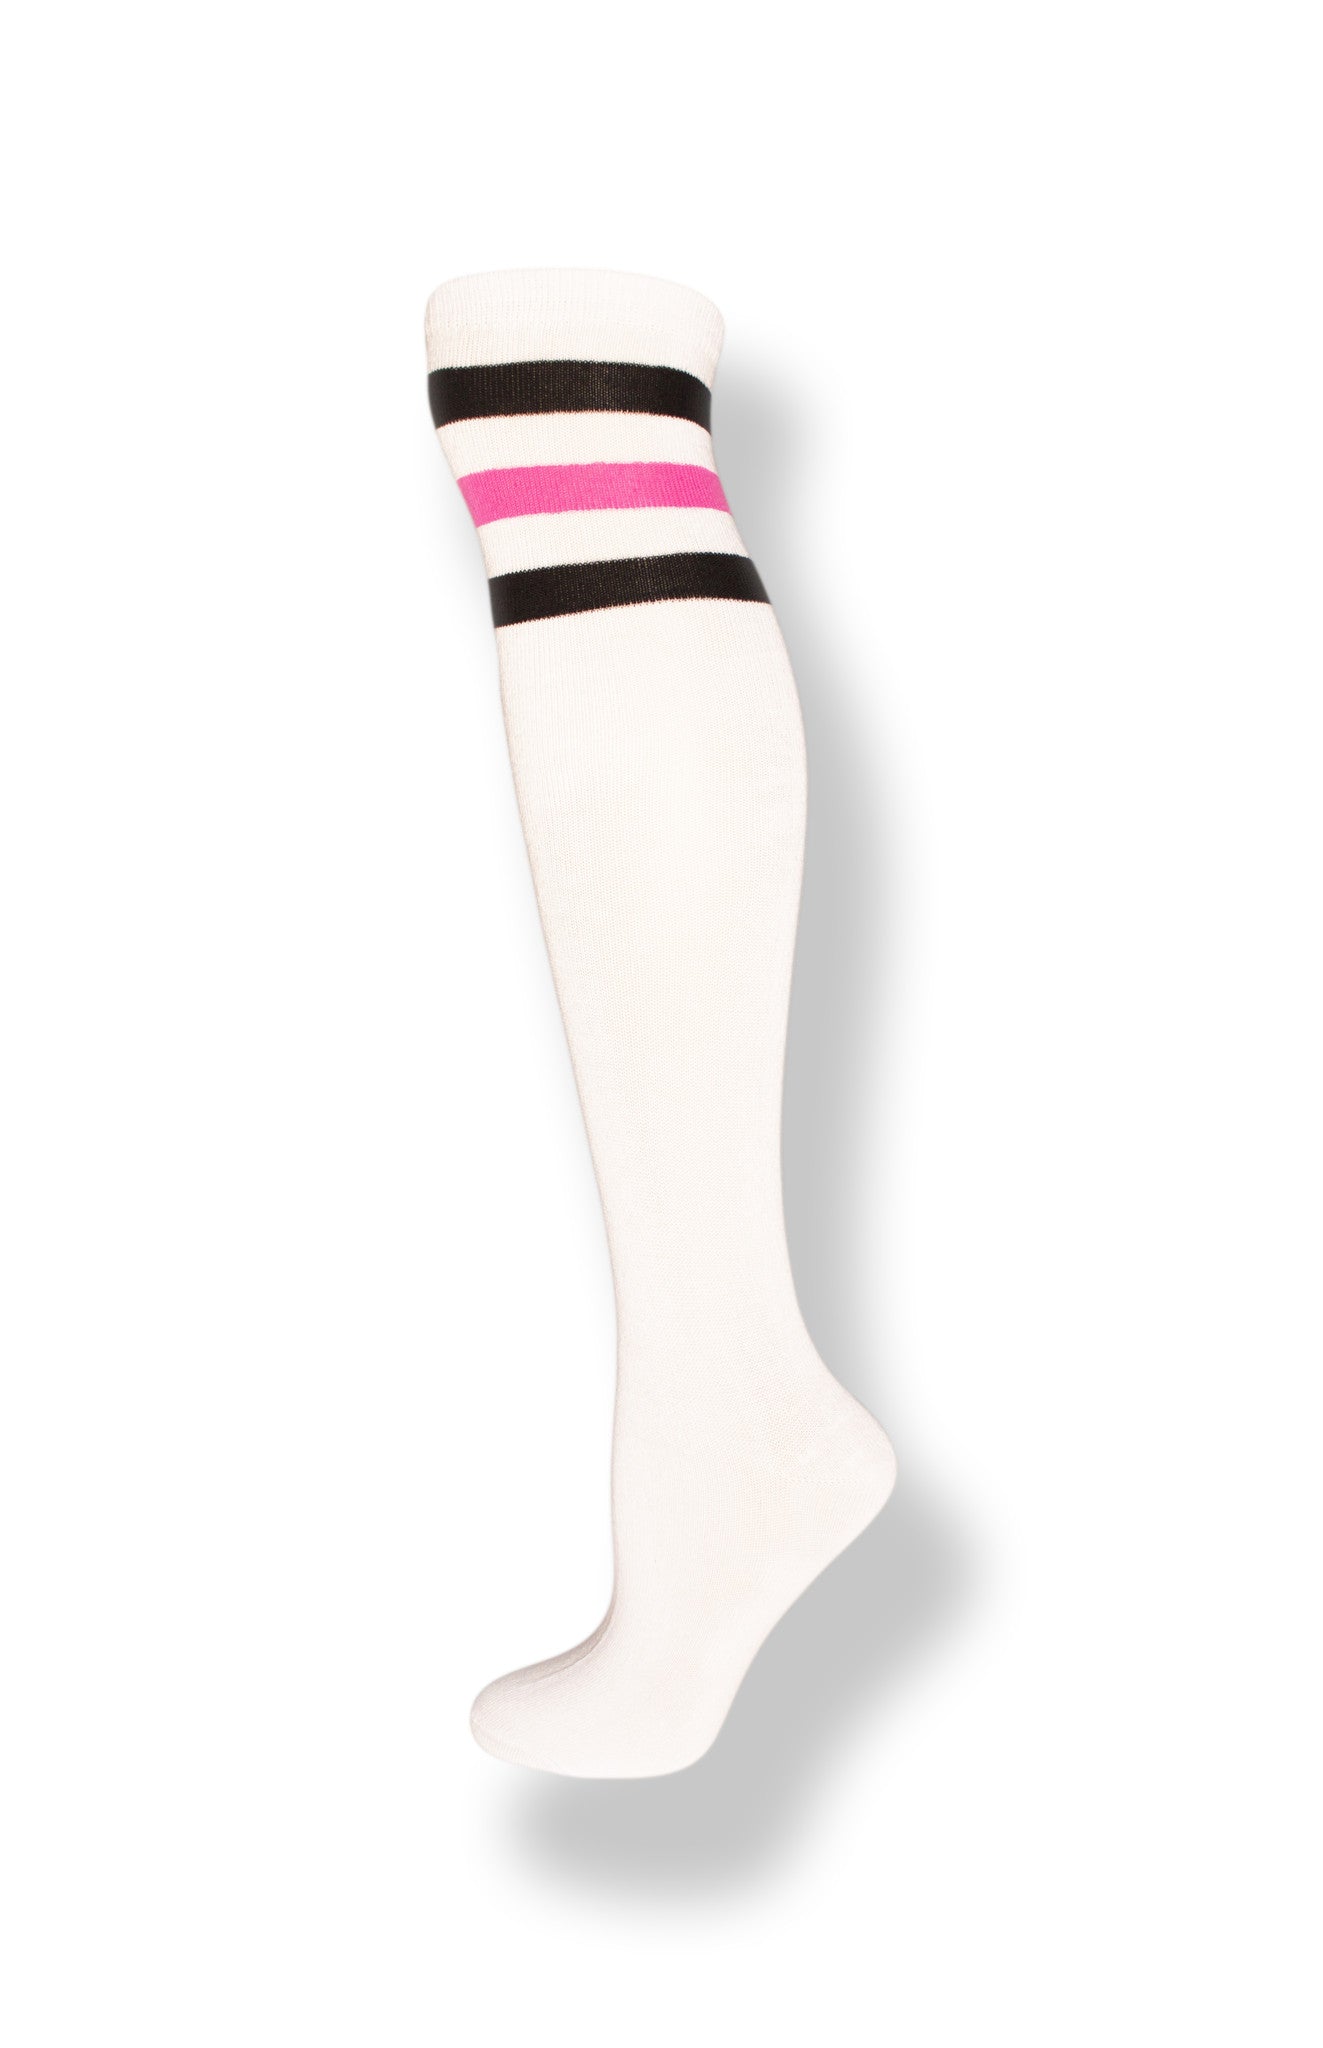 White with Black and Neon Pink Stripes Knee High Sock